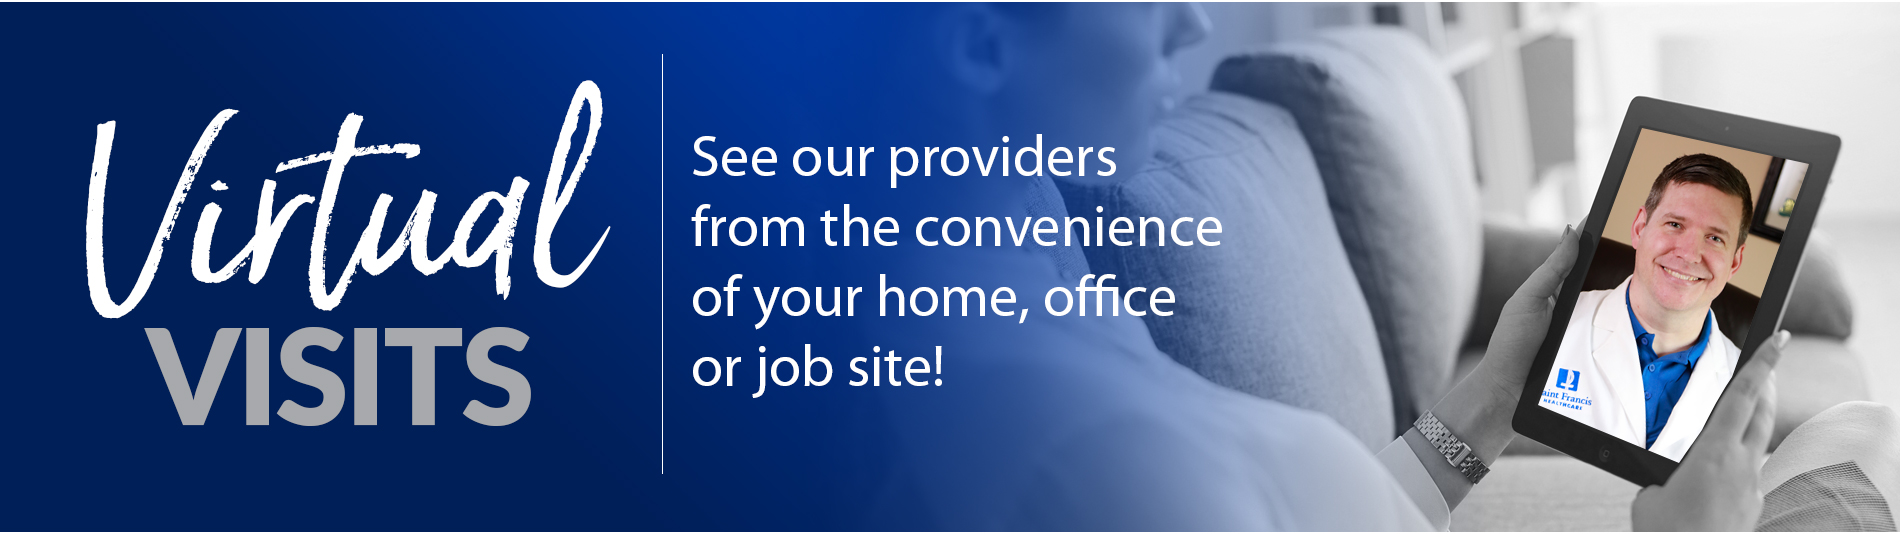 Virtual Visits - See our providers from the convenience of your home, office or job site!